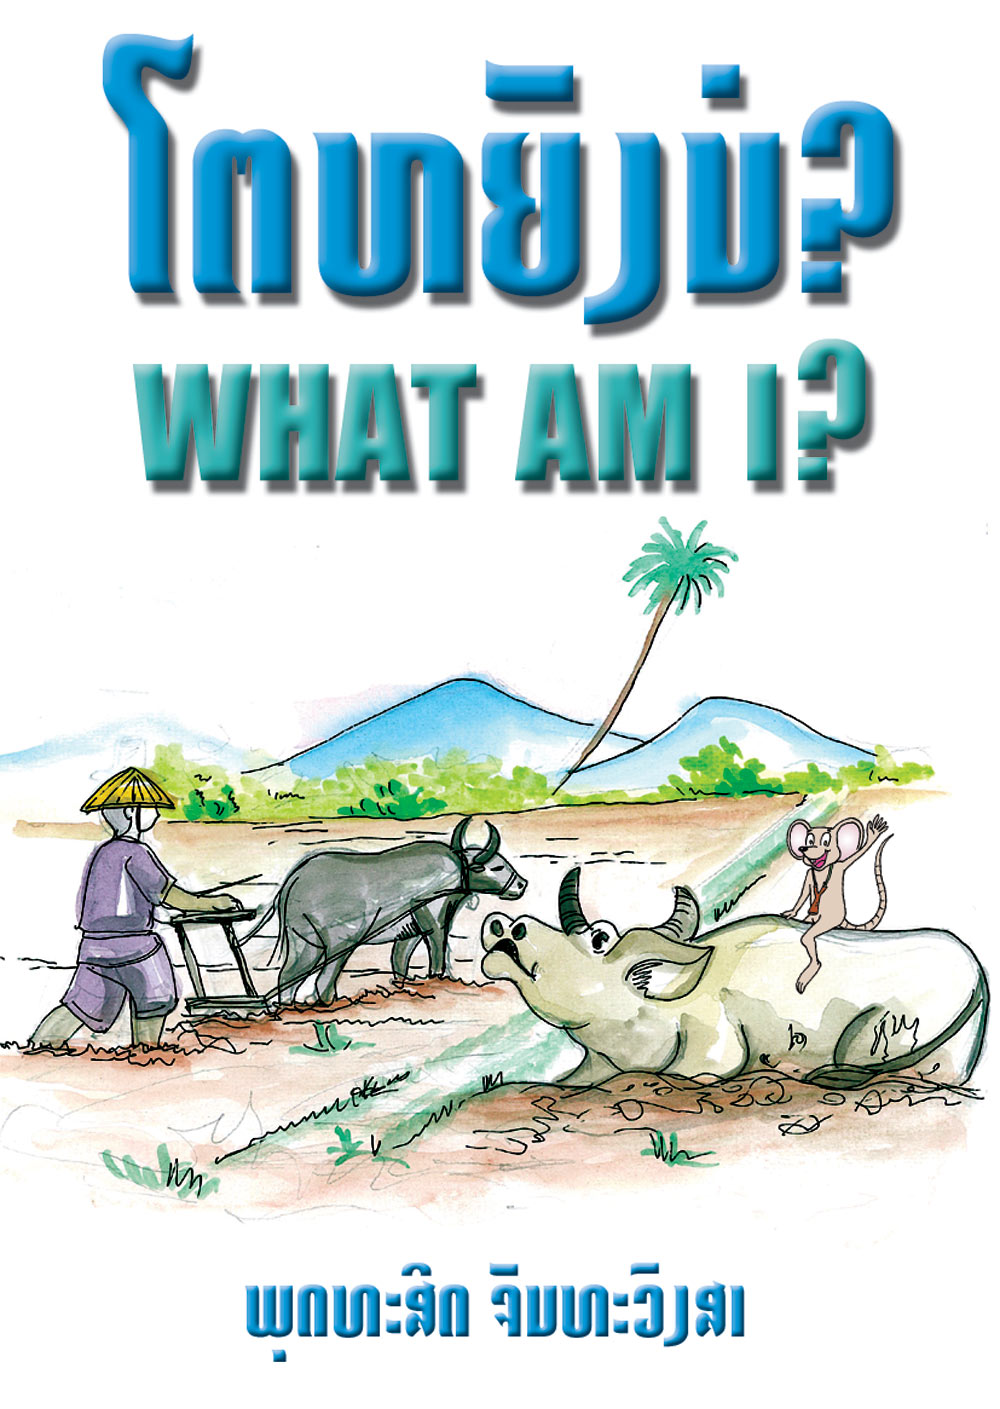 What Am I? large book cover, published in Lao and English